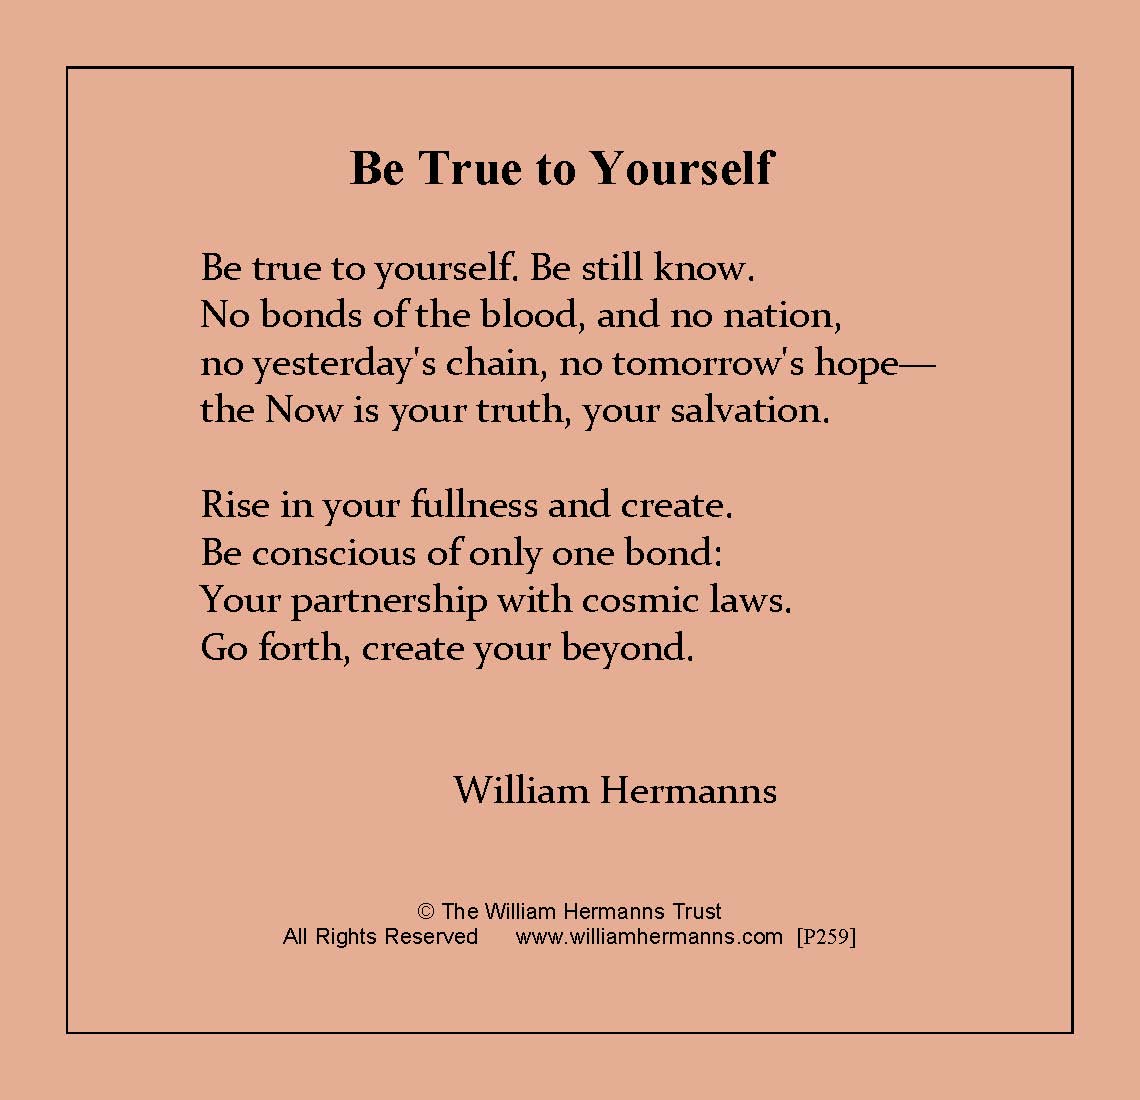 Be True To Yourself by William Hermanns